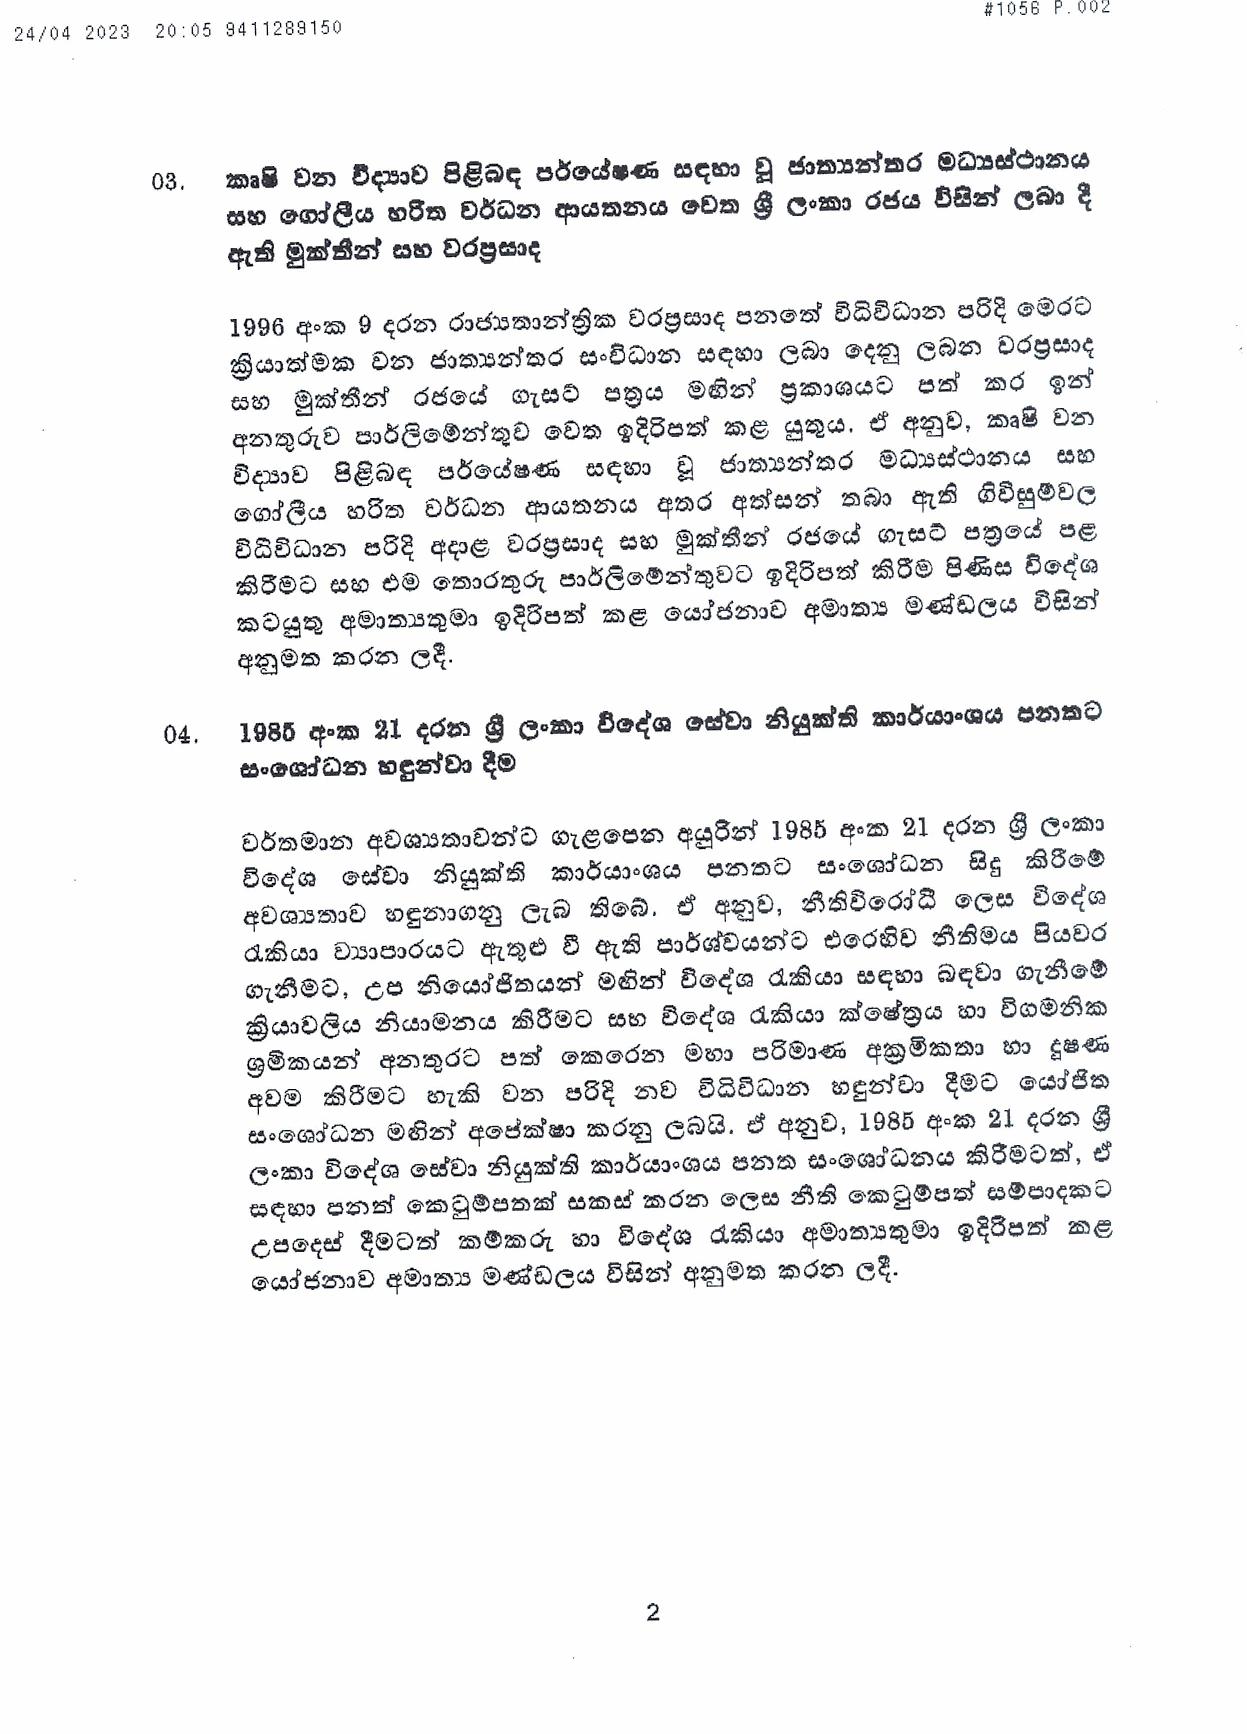 Cabinet Decision 2023.04.24 page 002